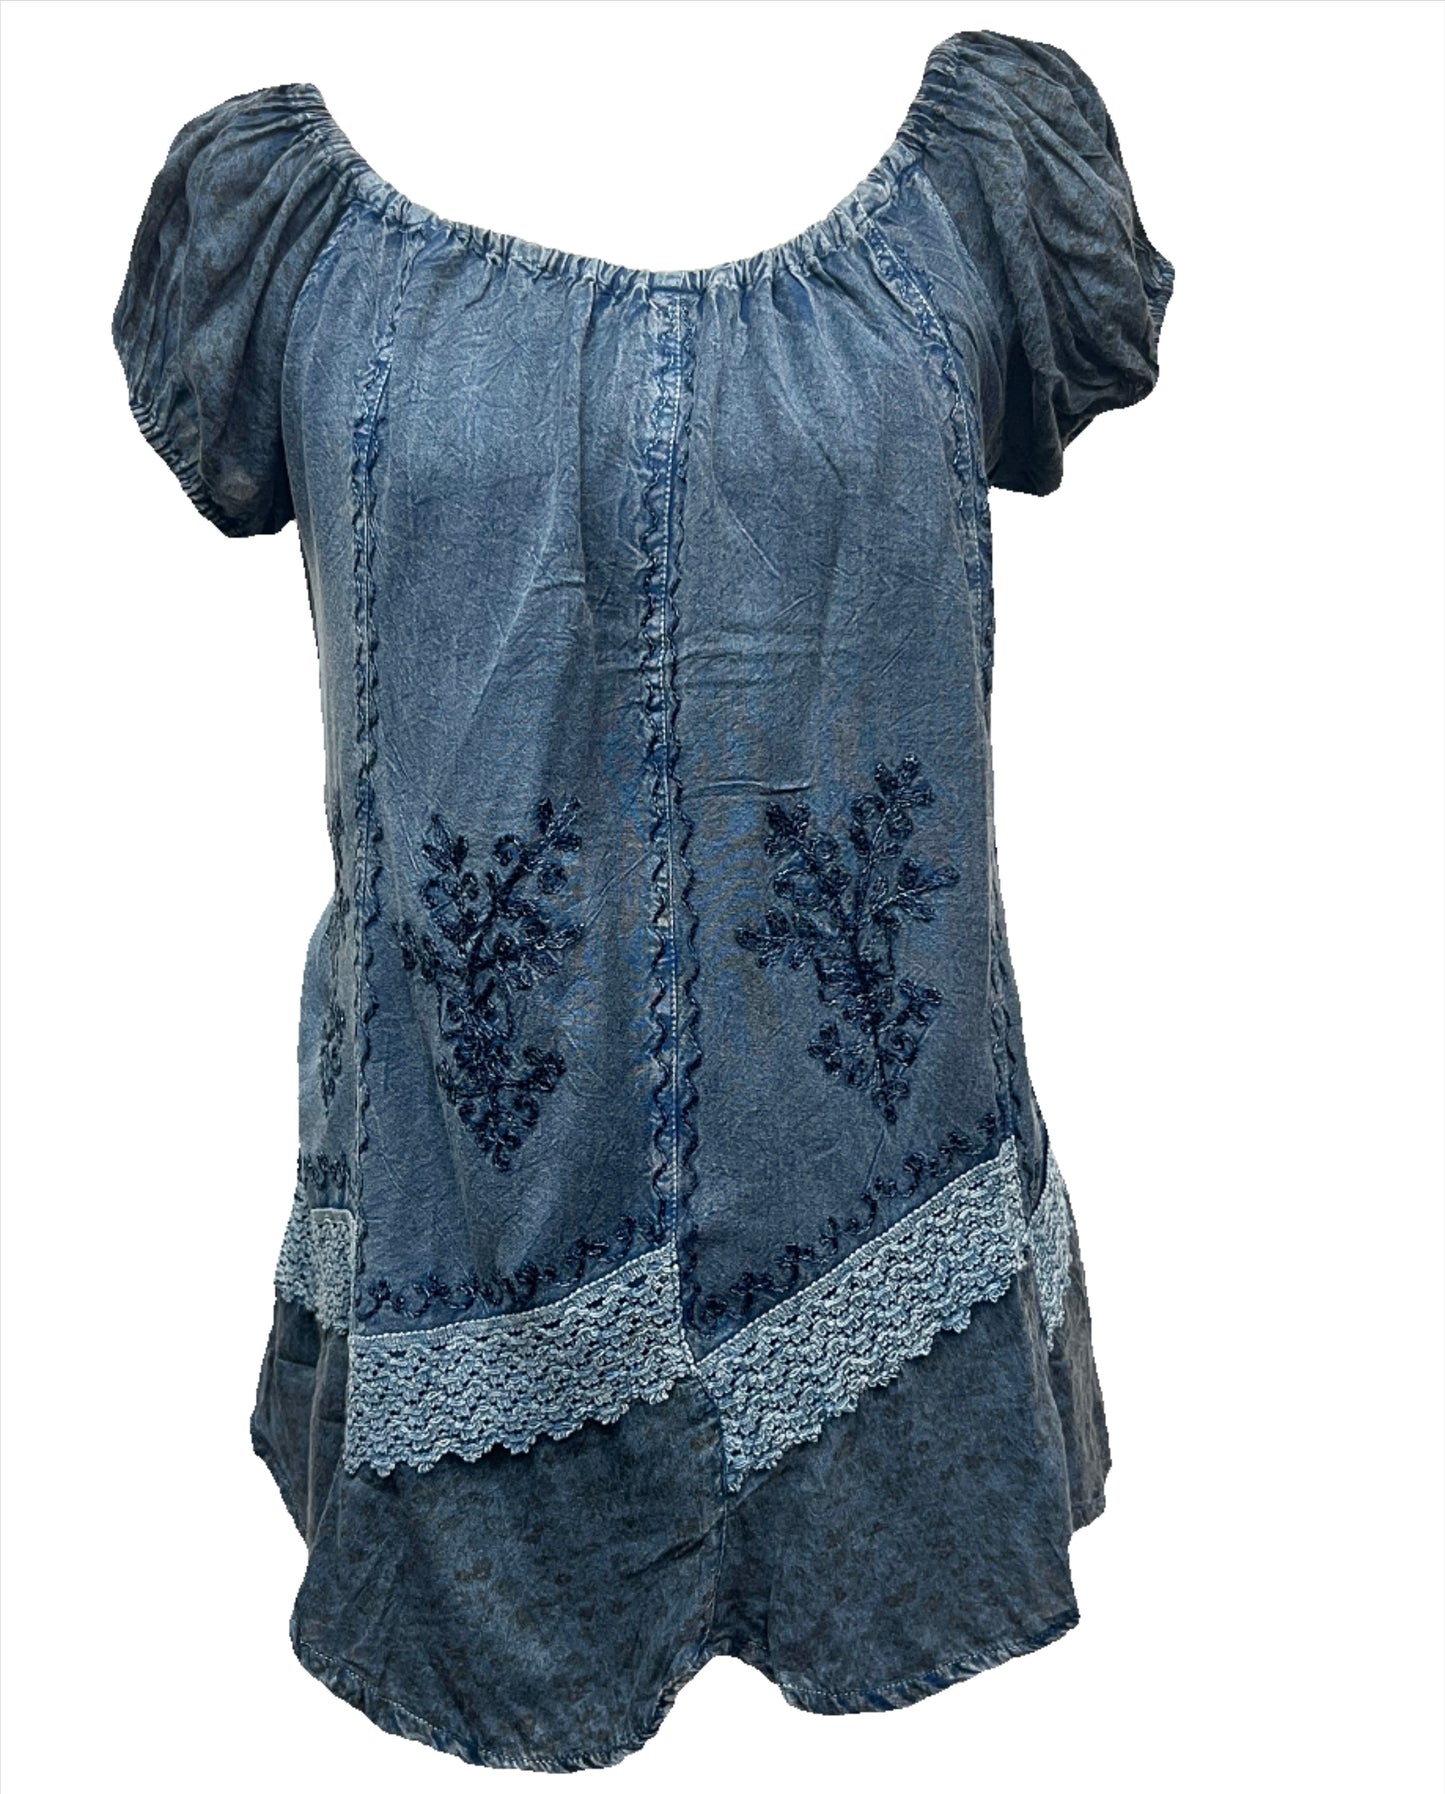 Embroidered Rayon Top